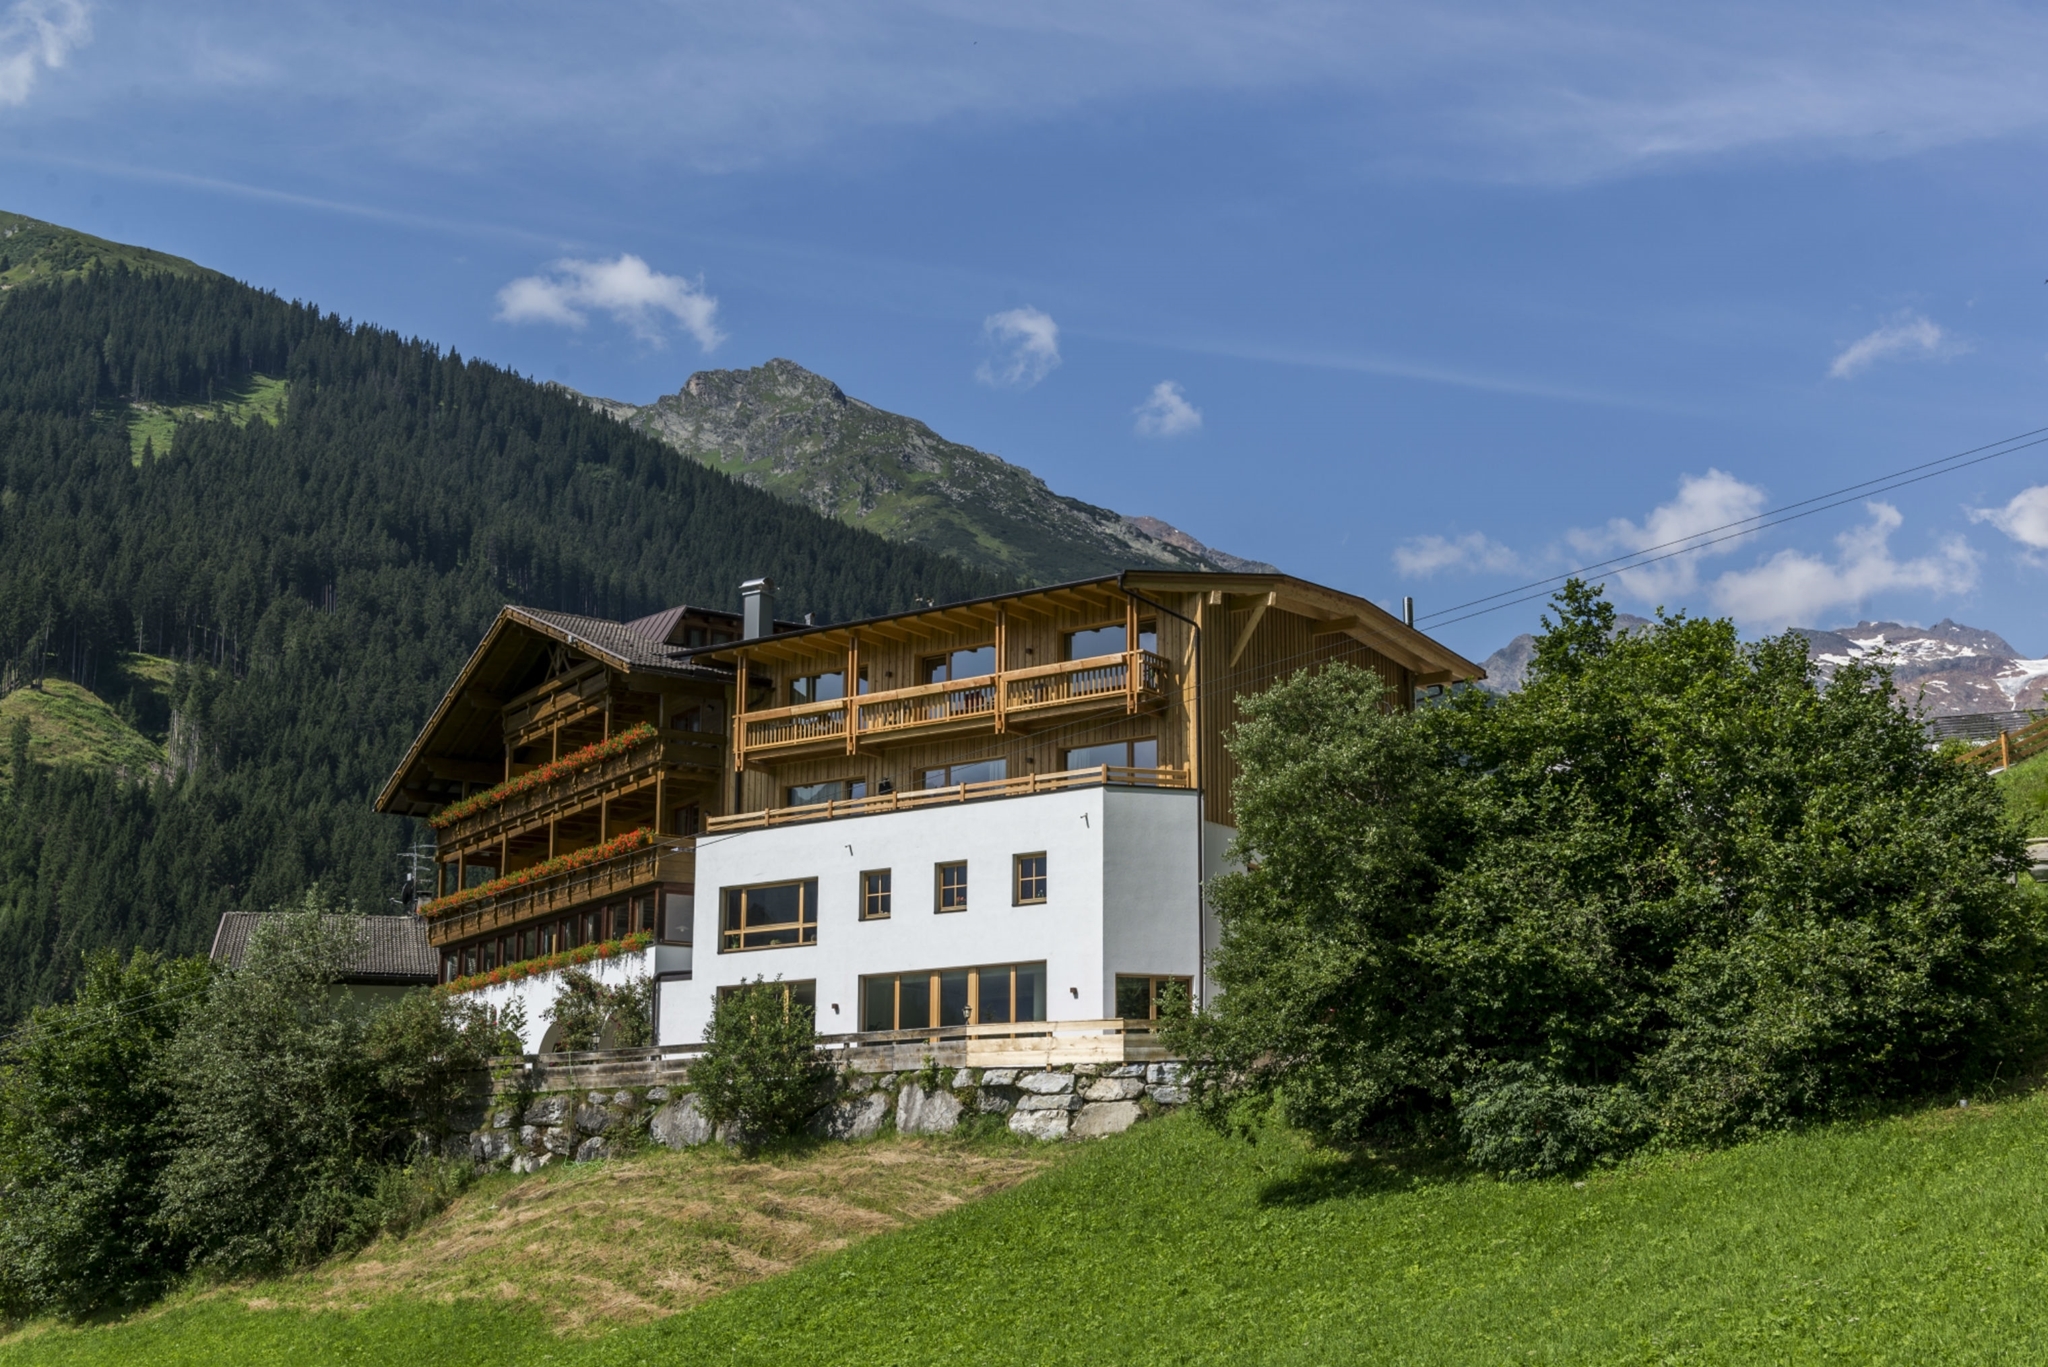 Aktivhotel Panorama - Colle Isarco in Valle Isarco